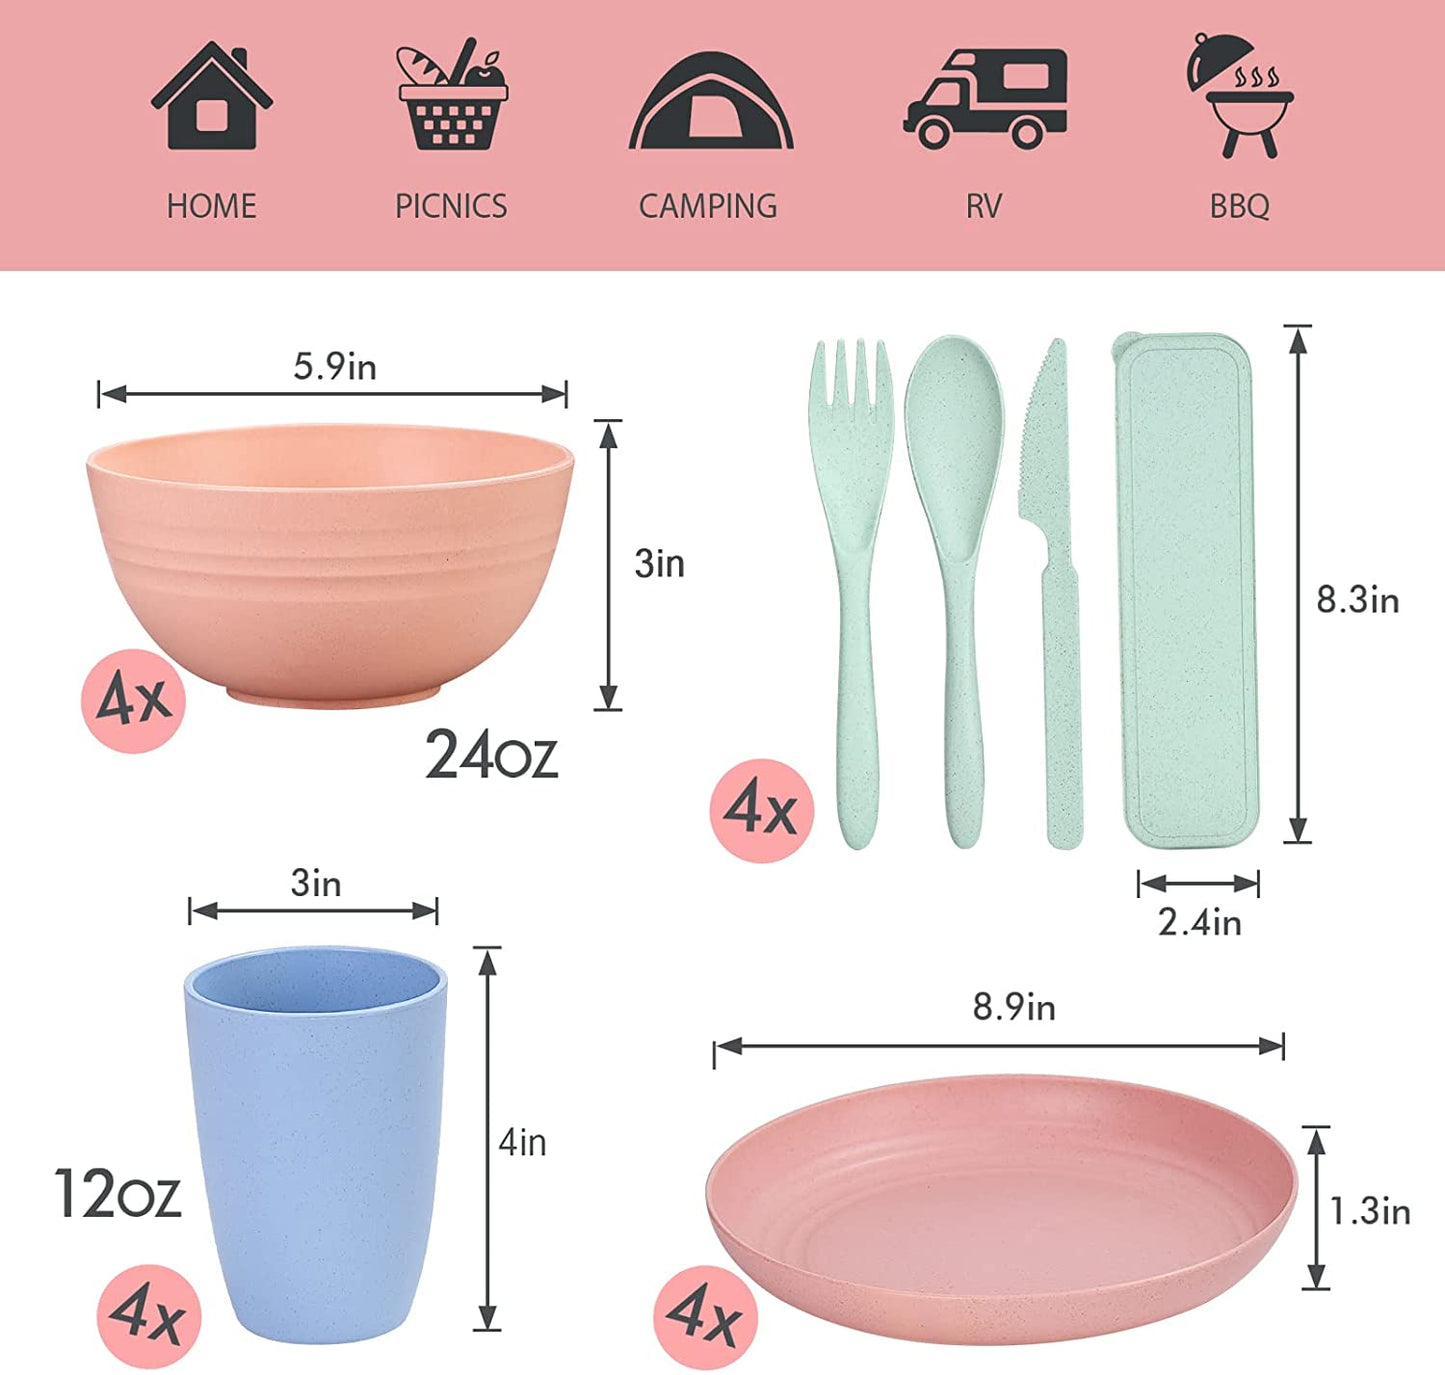 Wheat Straw Dinnerware Sets, 28PCS Unbreakable, Microwave and Dishwasher Safe Tableware Set, Lightweight Plates, Cups, Bowls, Forks (Colorful, Fork)